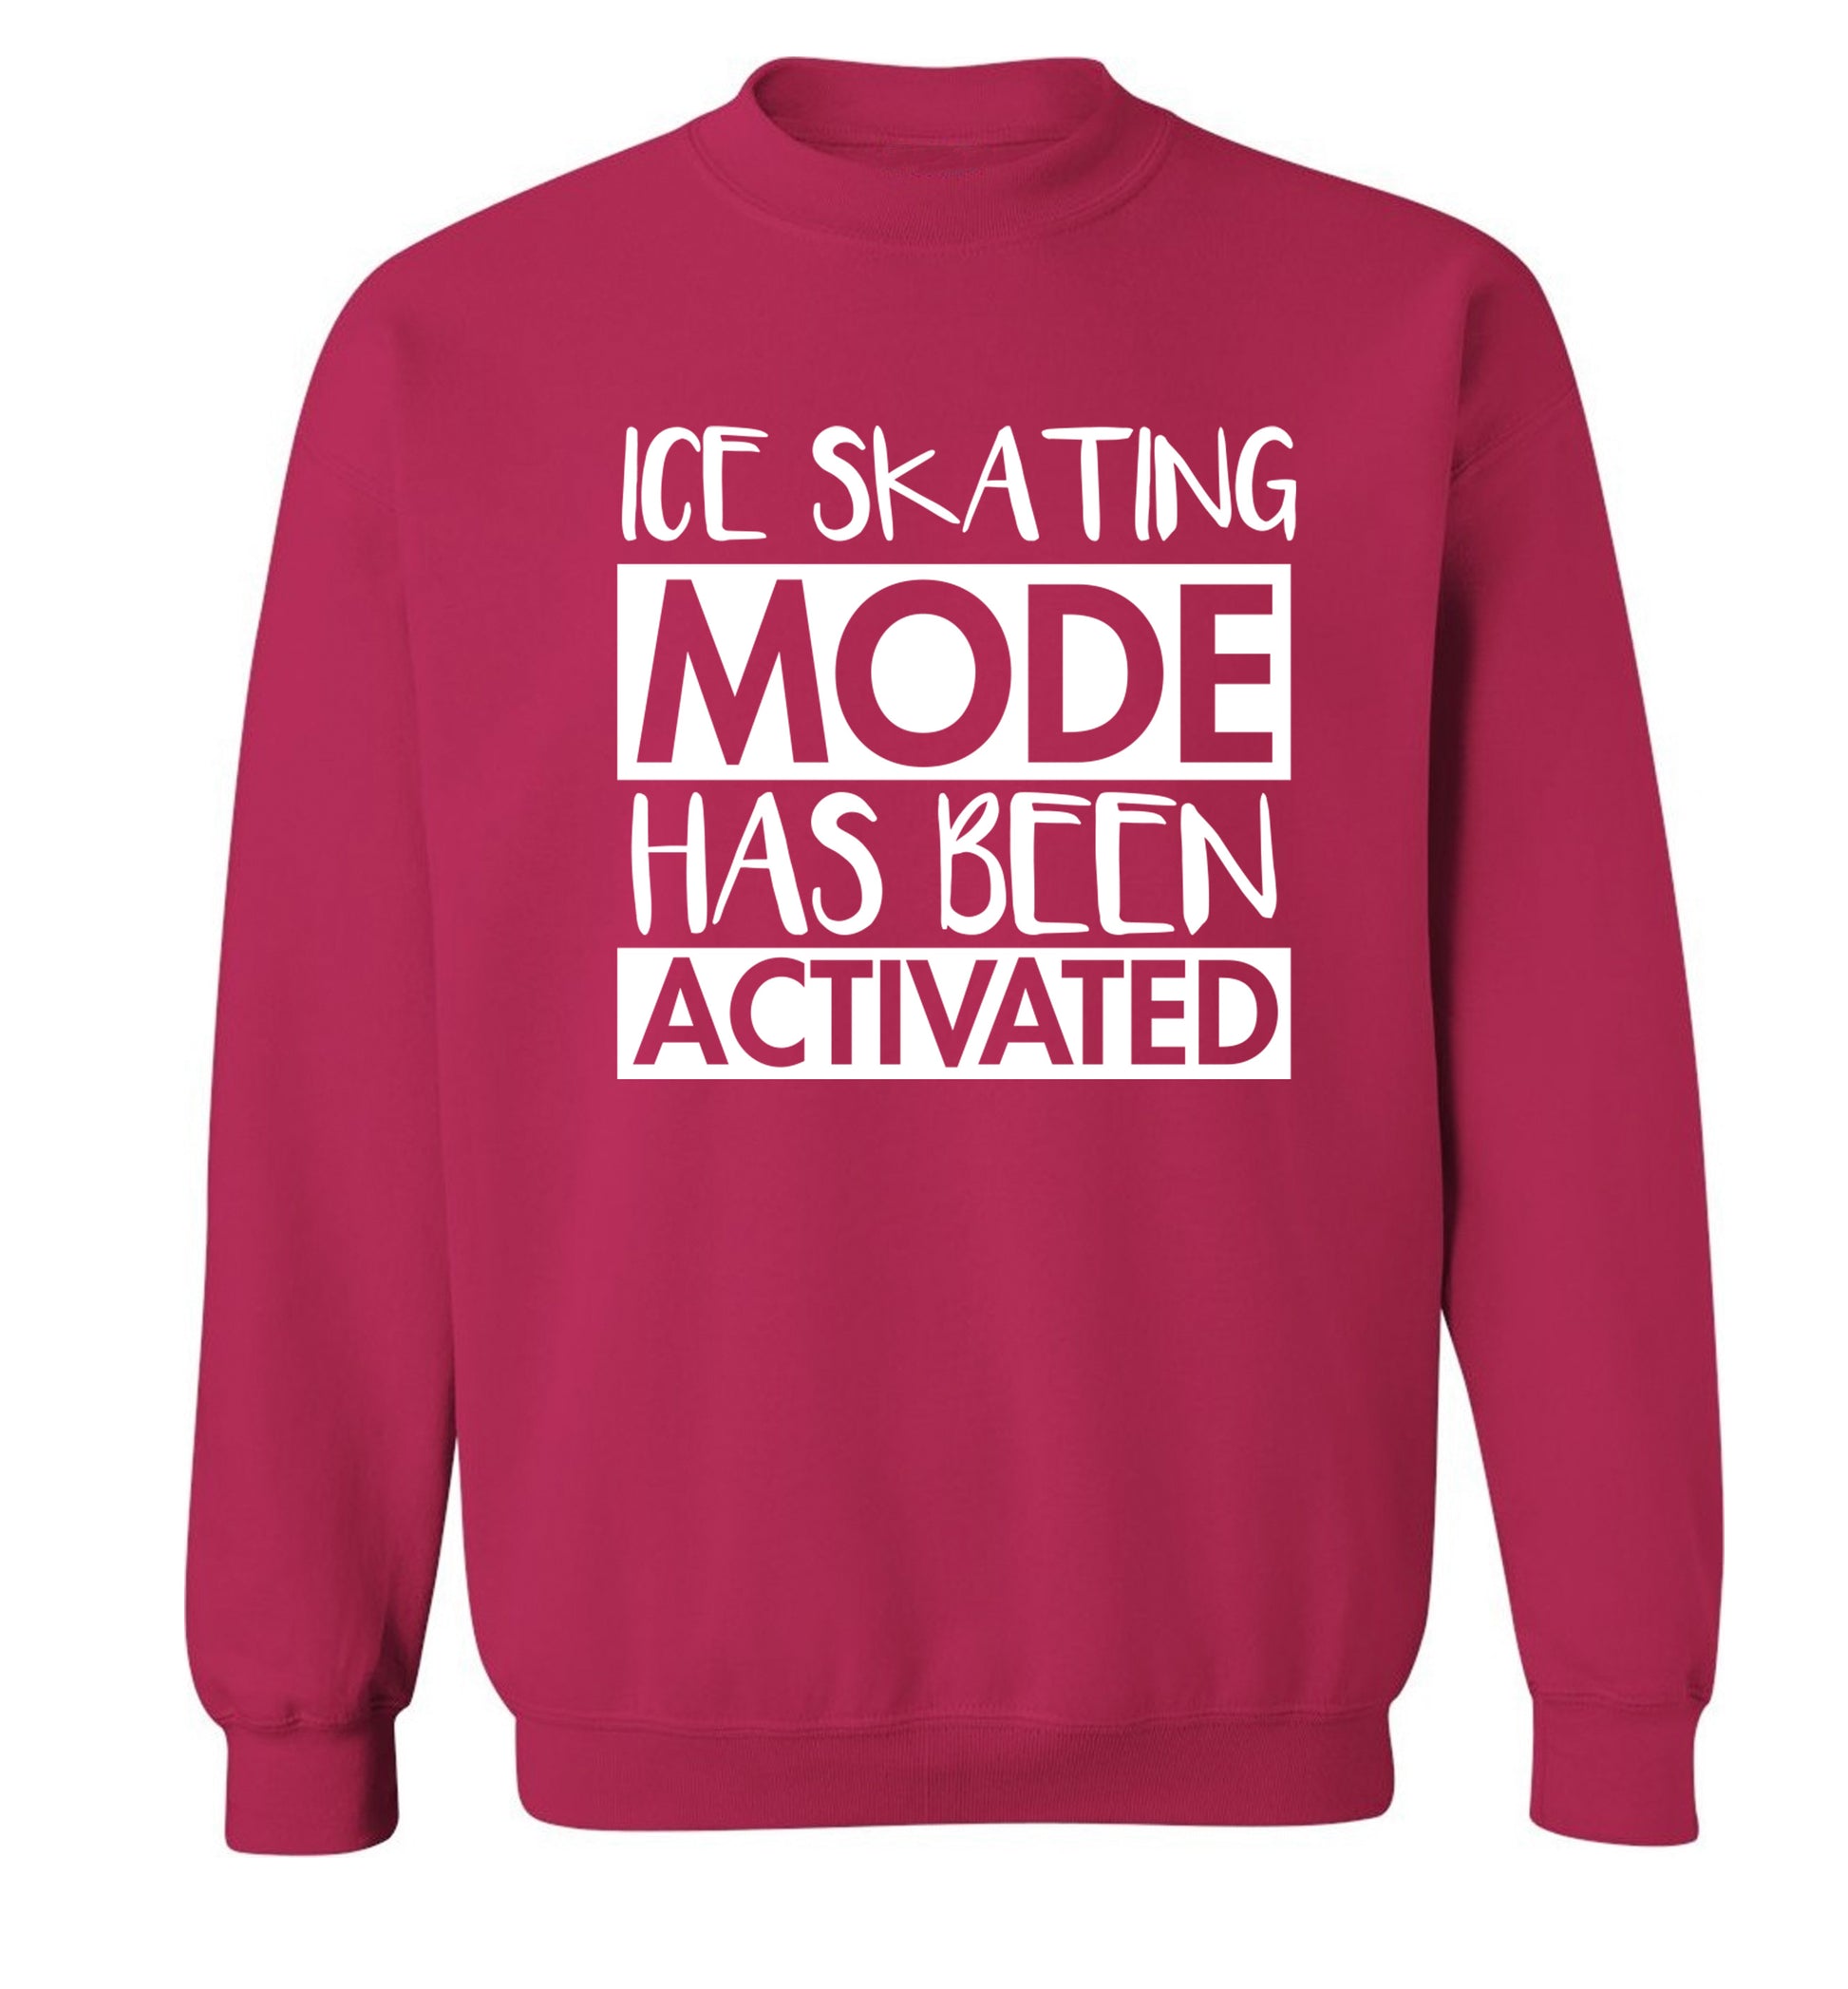 Ice skating mode activated Adult's unisexpink Sweater 2XL